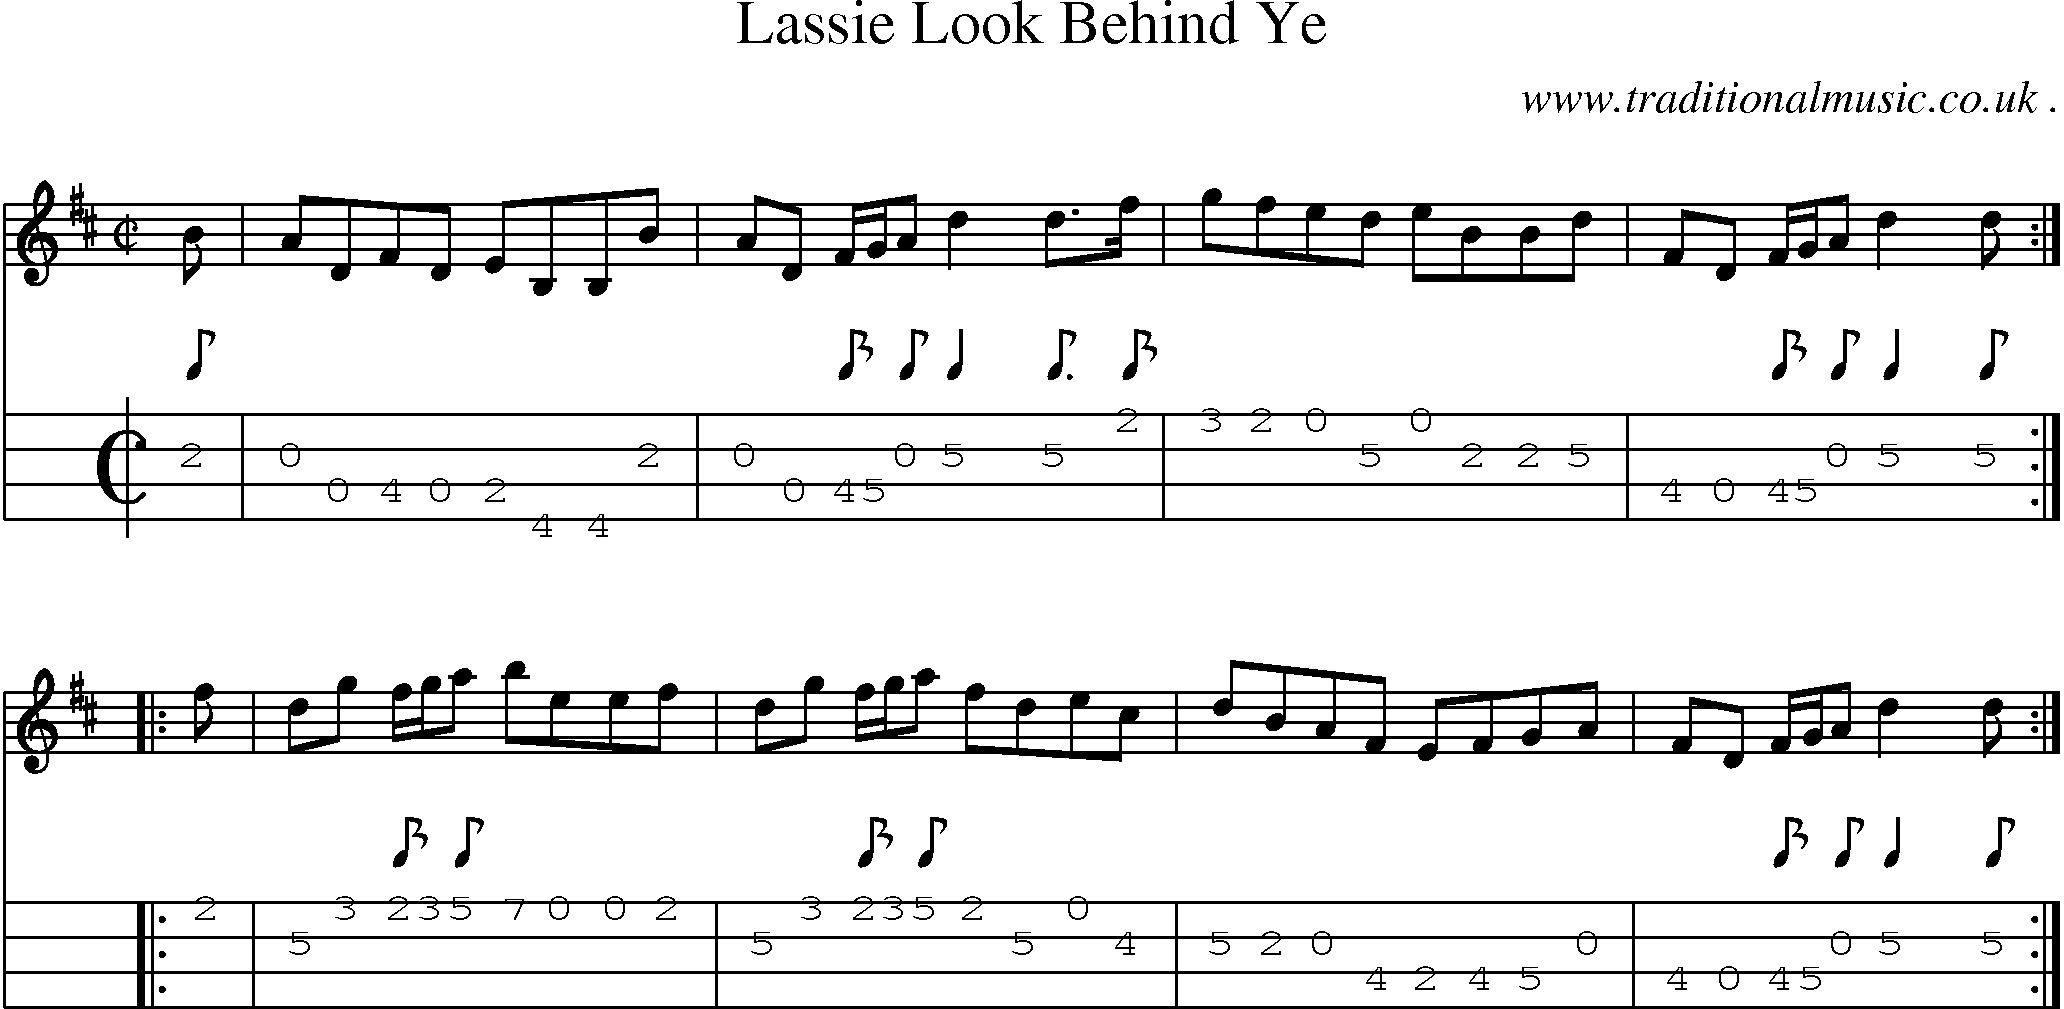 Sheet-music  score, Chords and Mandolin Tabs for Lassie Look Behind Ye